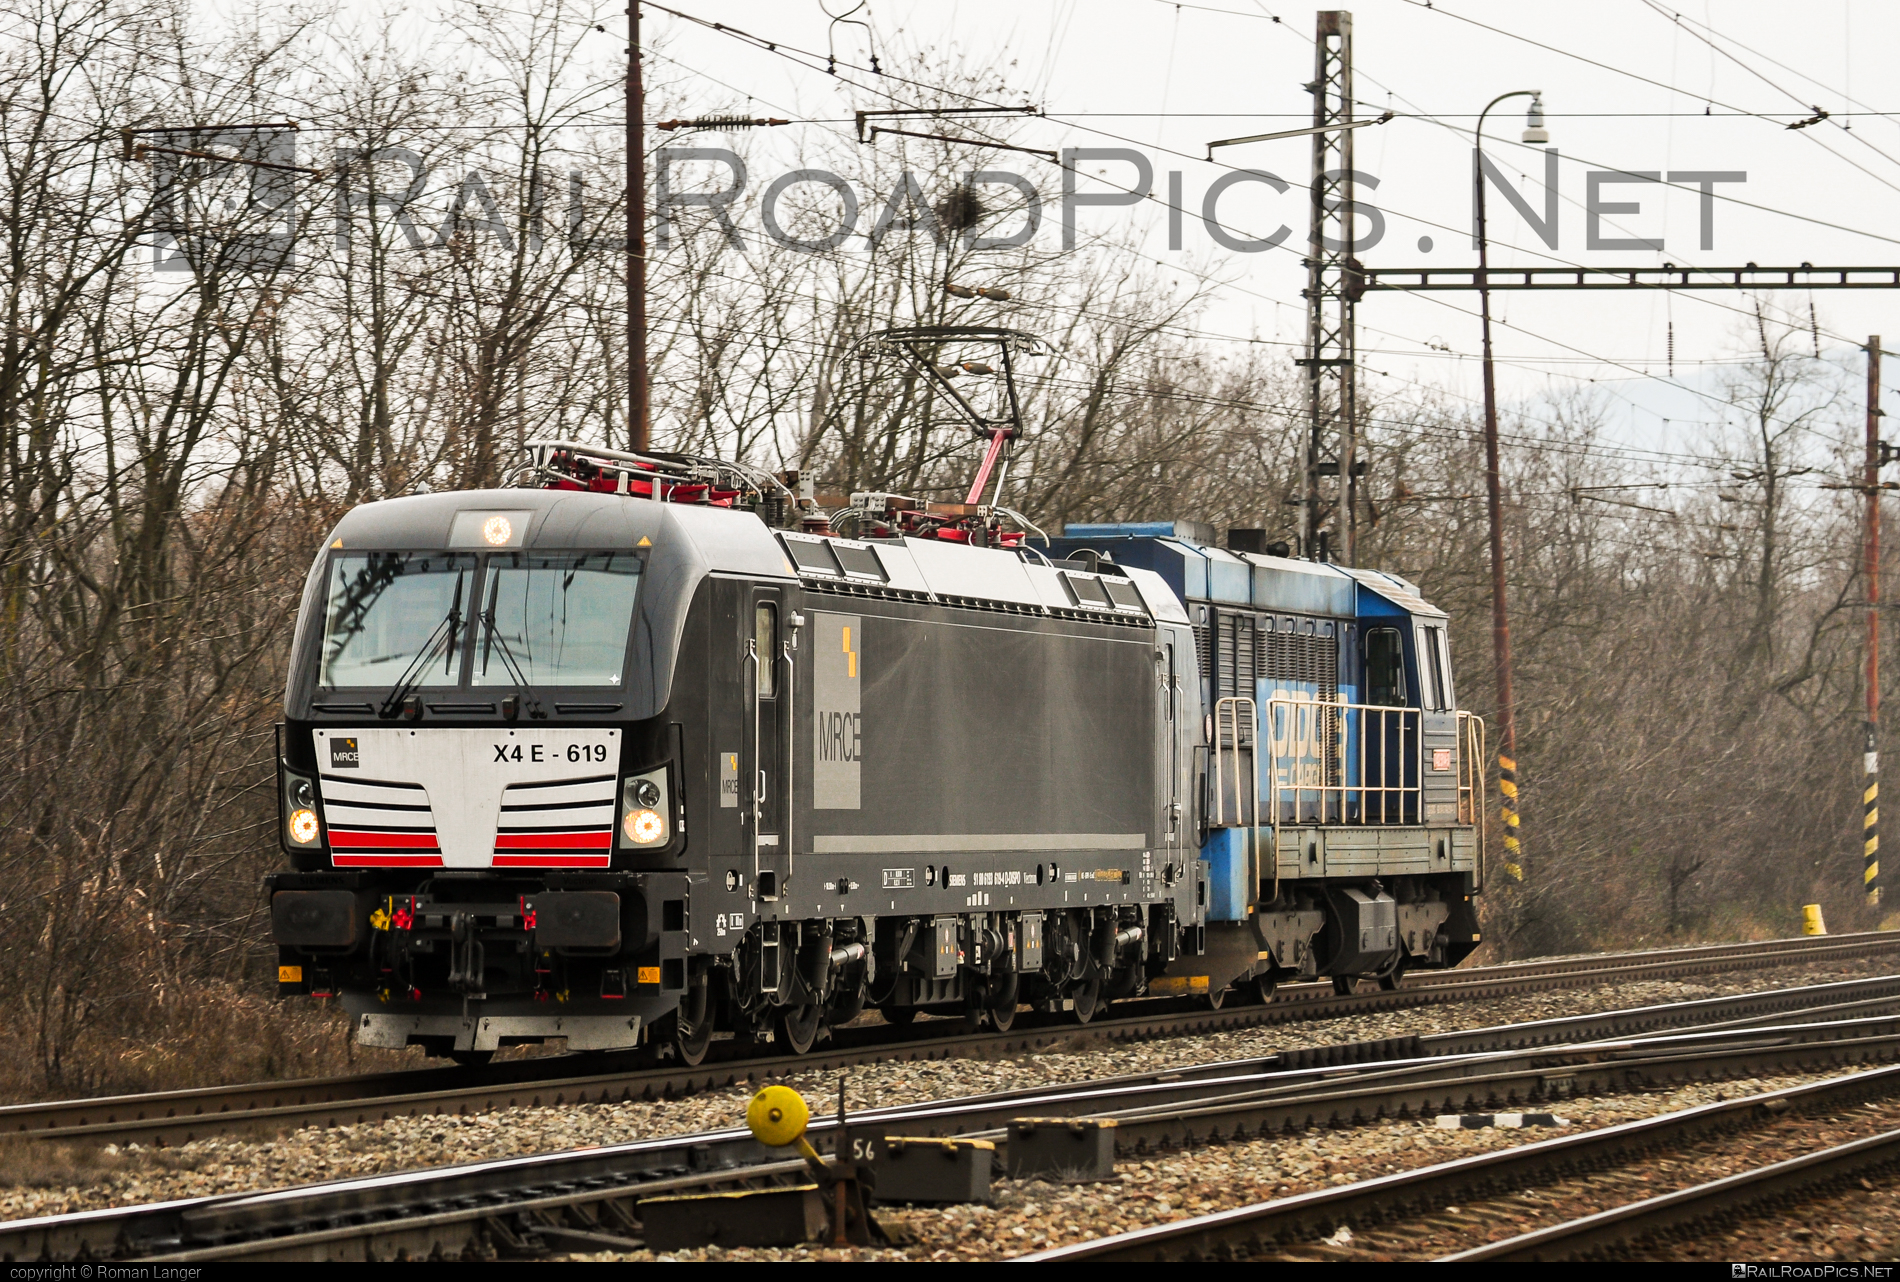 Siemens Vectron MS - 193 619 operated by Retrack Slovakia s. r. o. #dispolok #mitsuirailcapitaleurope #mitsuirailcapitaleuropegmbh #mrce #odos #retrack #retrackslovakia #siemens #siemensVectron #siemensVectronMS #vectron #vectronMS